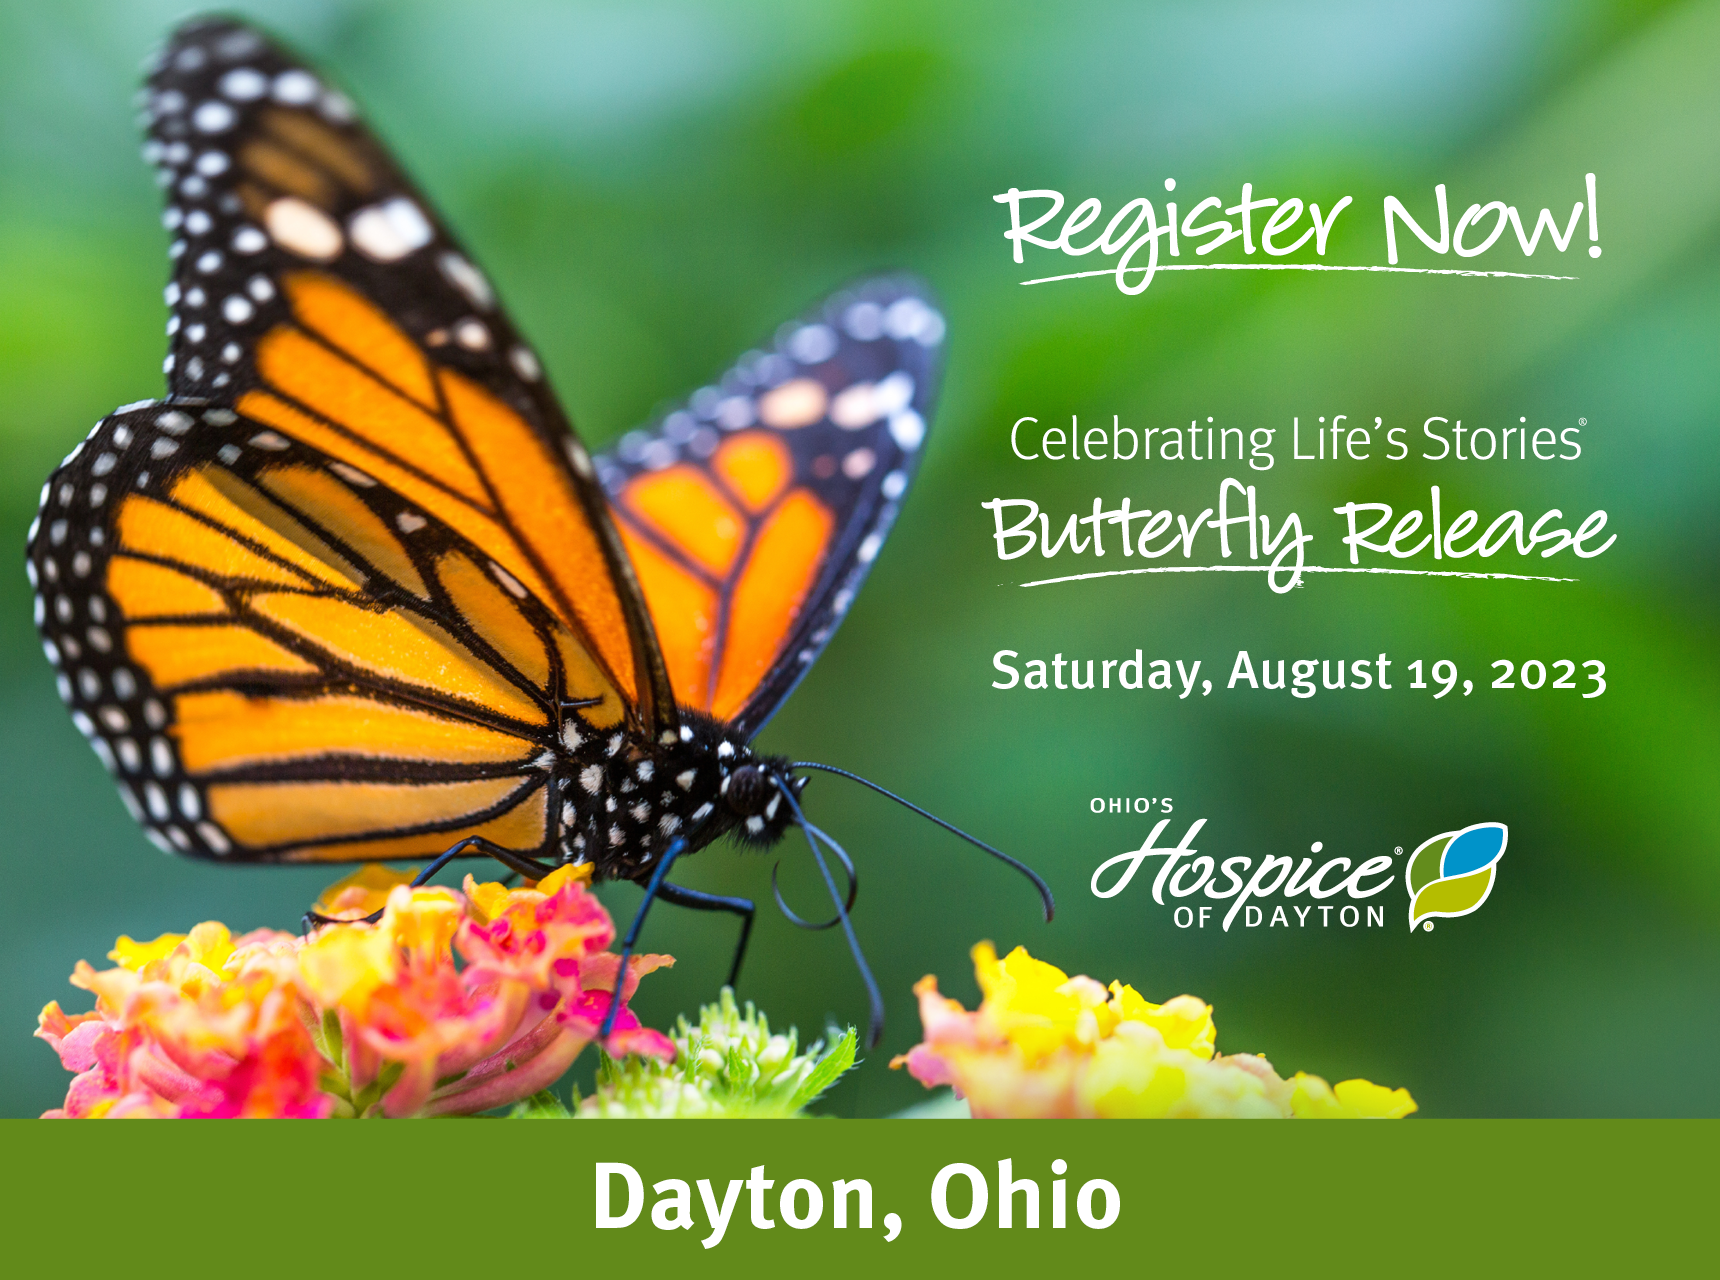 Register Today! Celebrating Life's Stories Butterfly Release. Saturday, August 19, 2023. Ohio's Hospice of Dayton. Dayton, Ohio